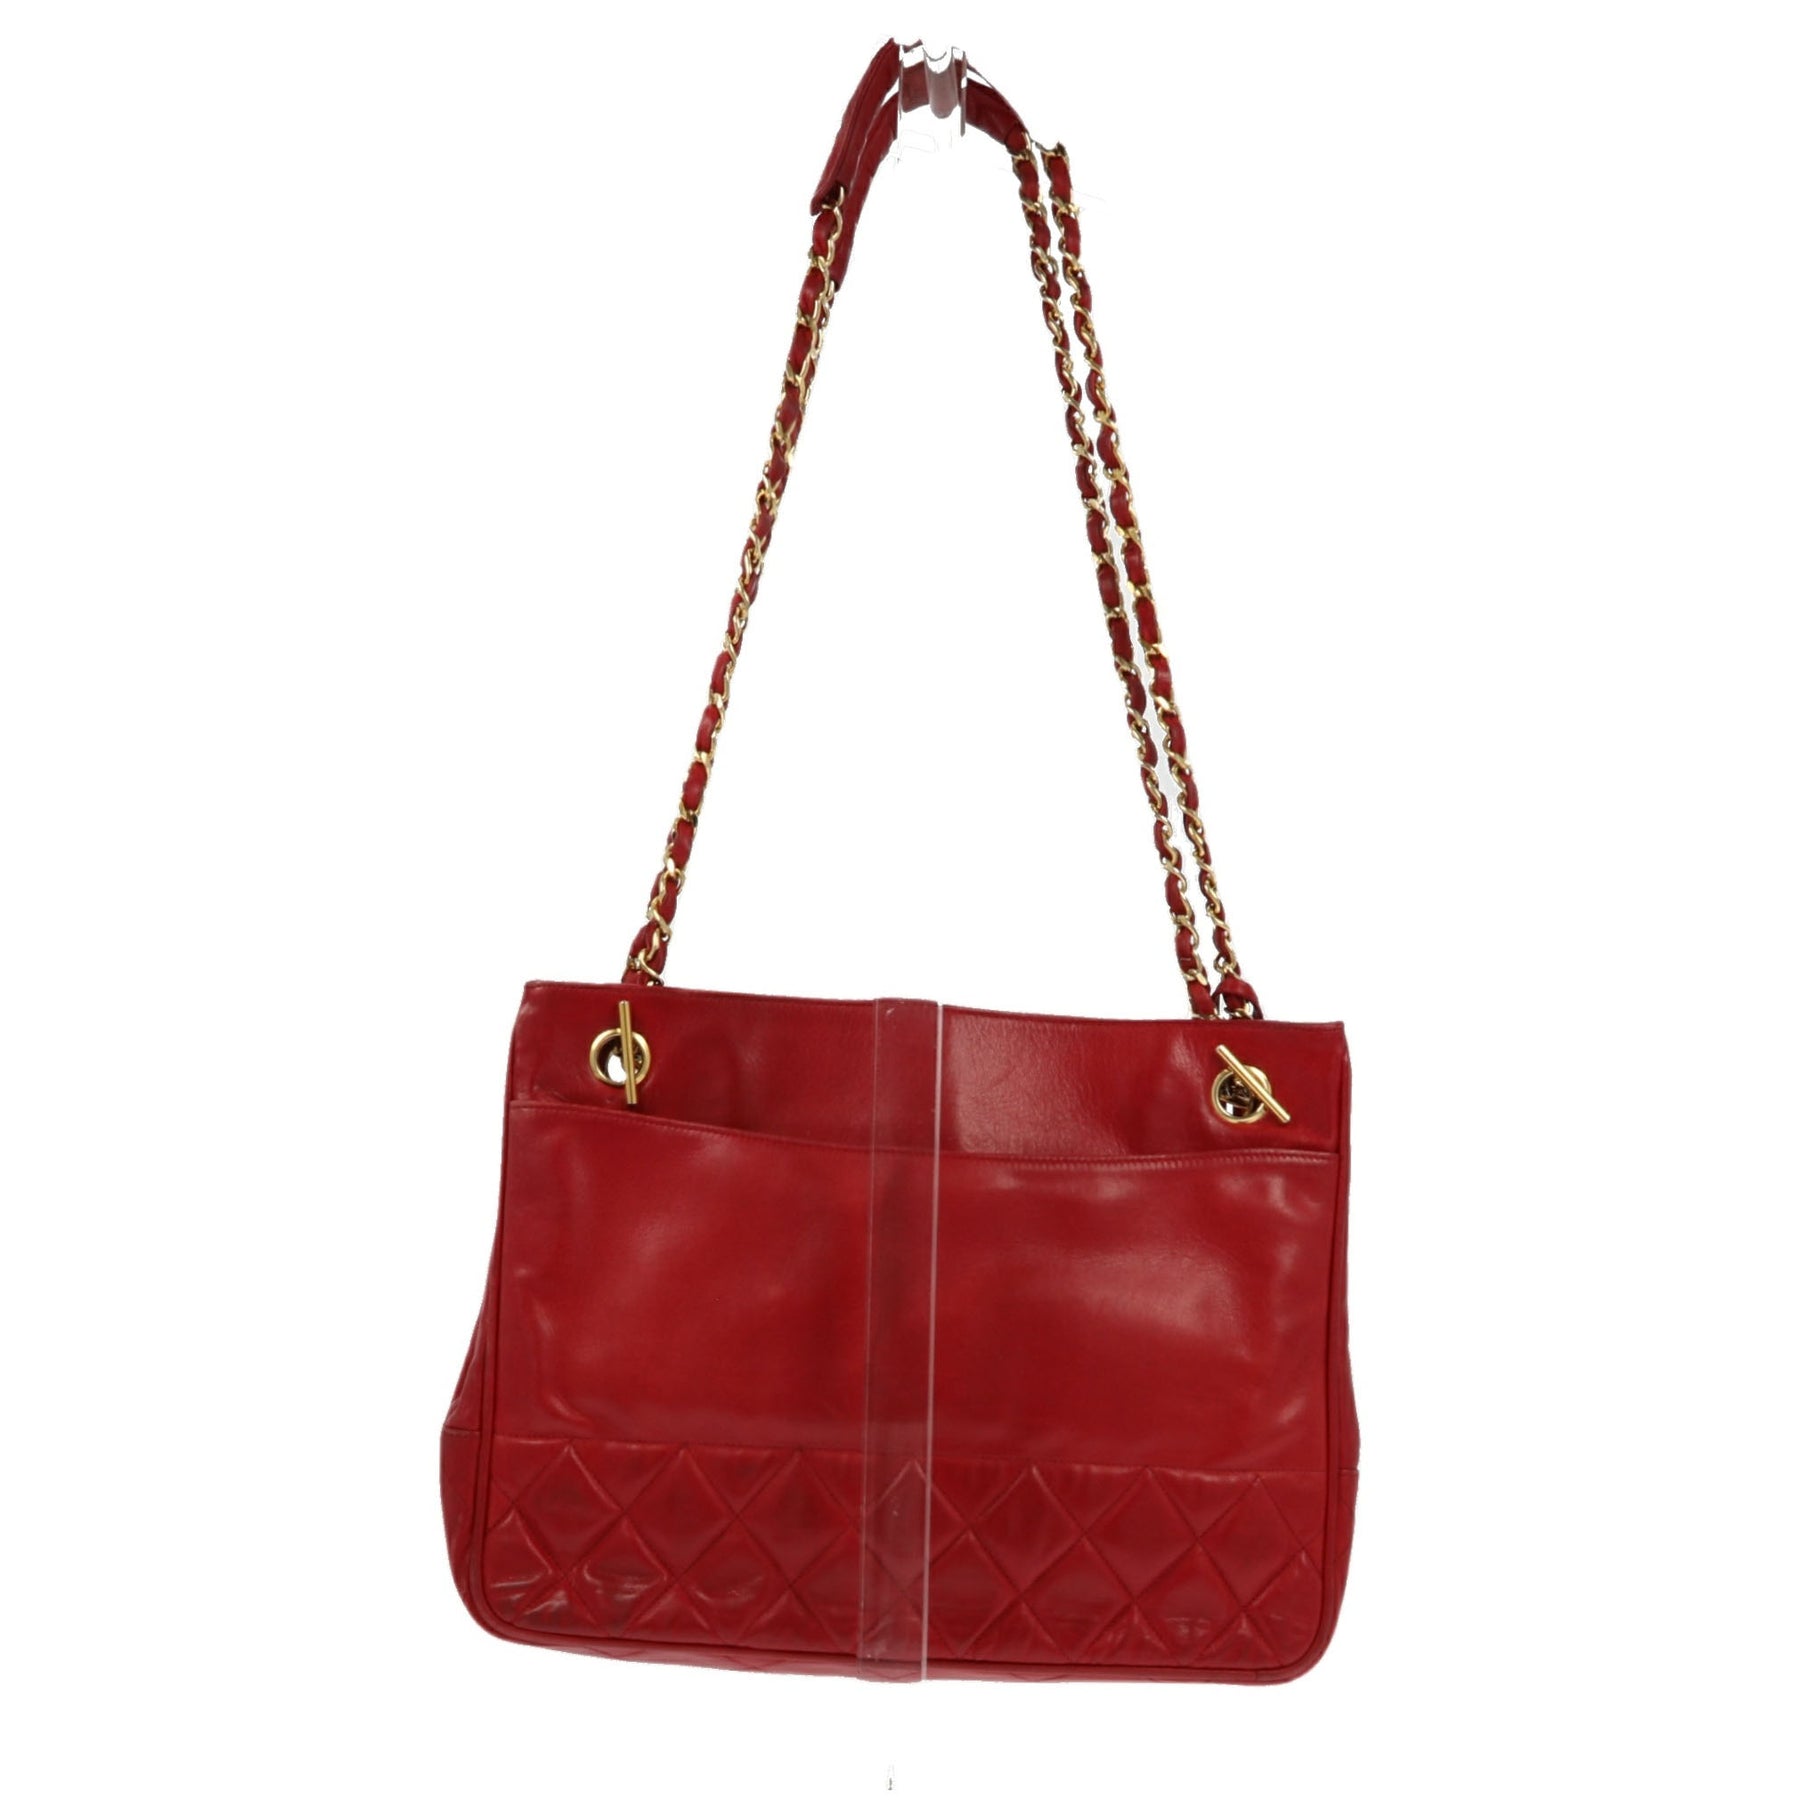 Chanel Shoulder Bag in Red Leather – Fancy Lux